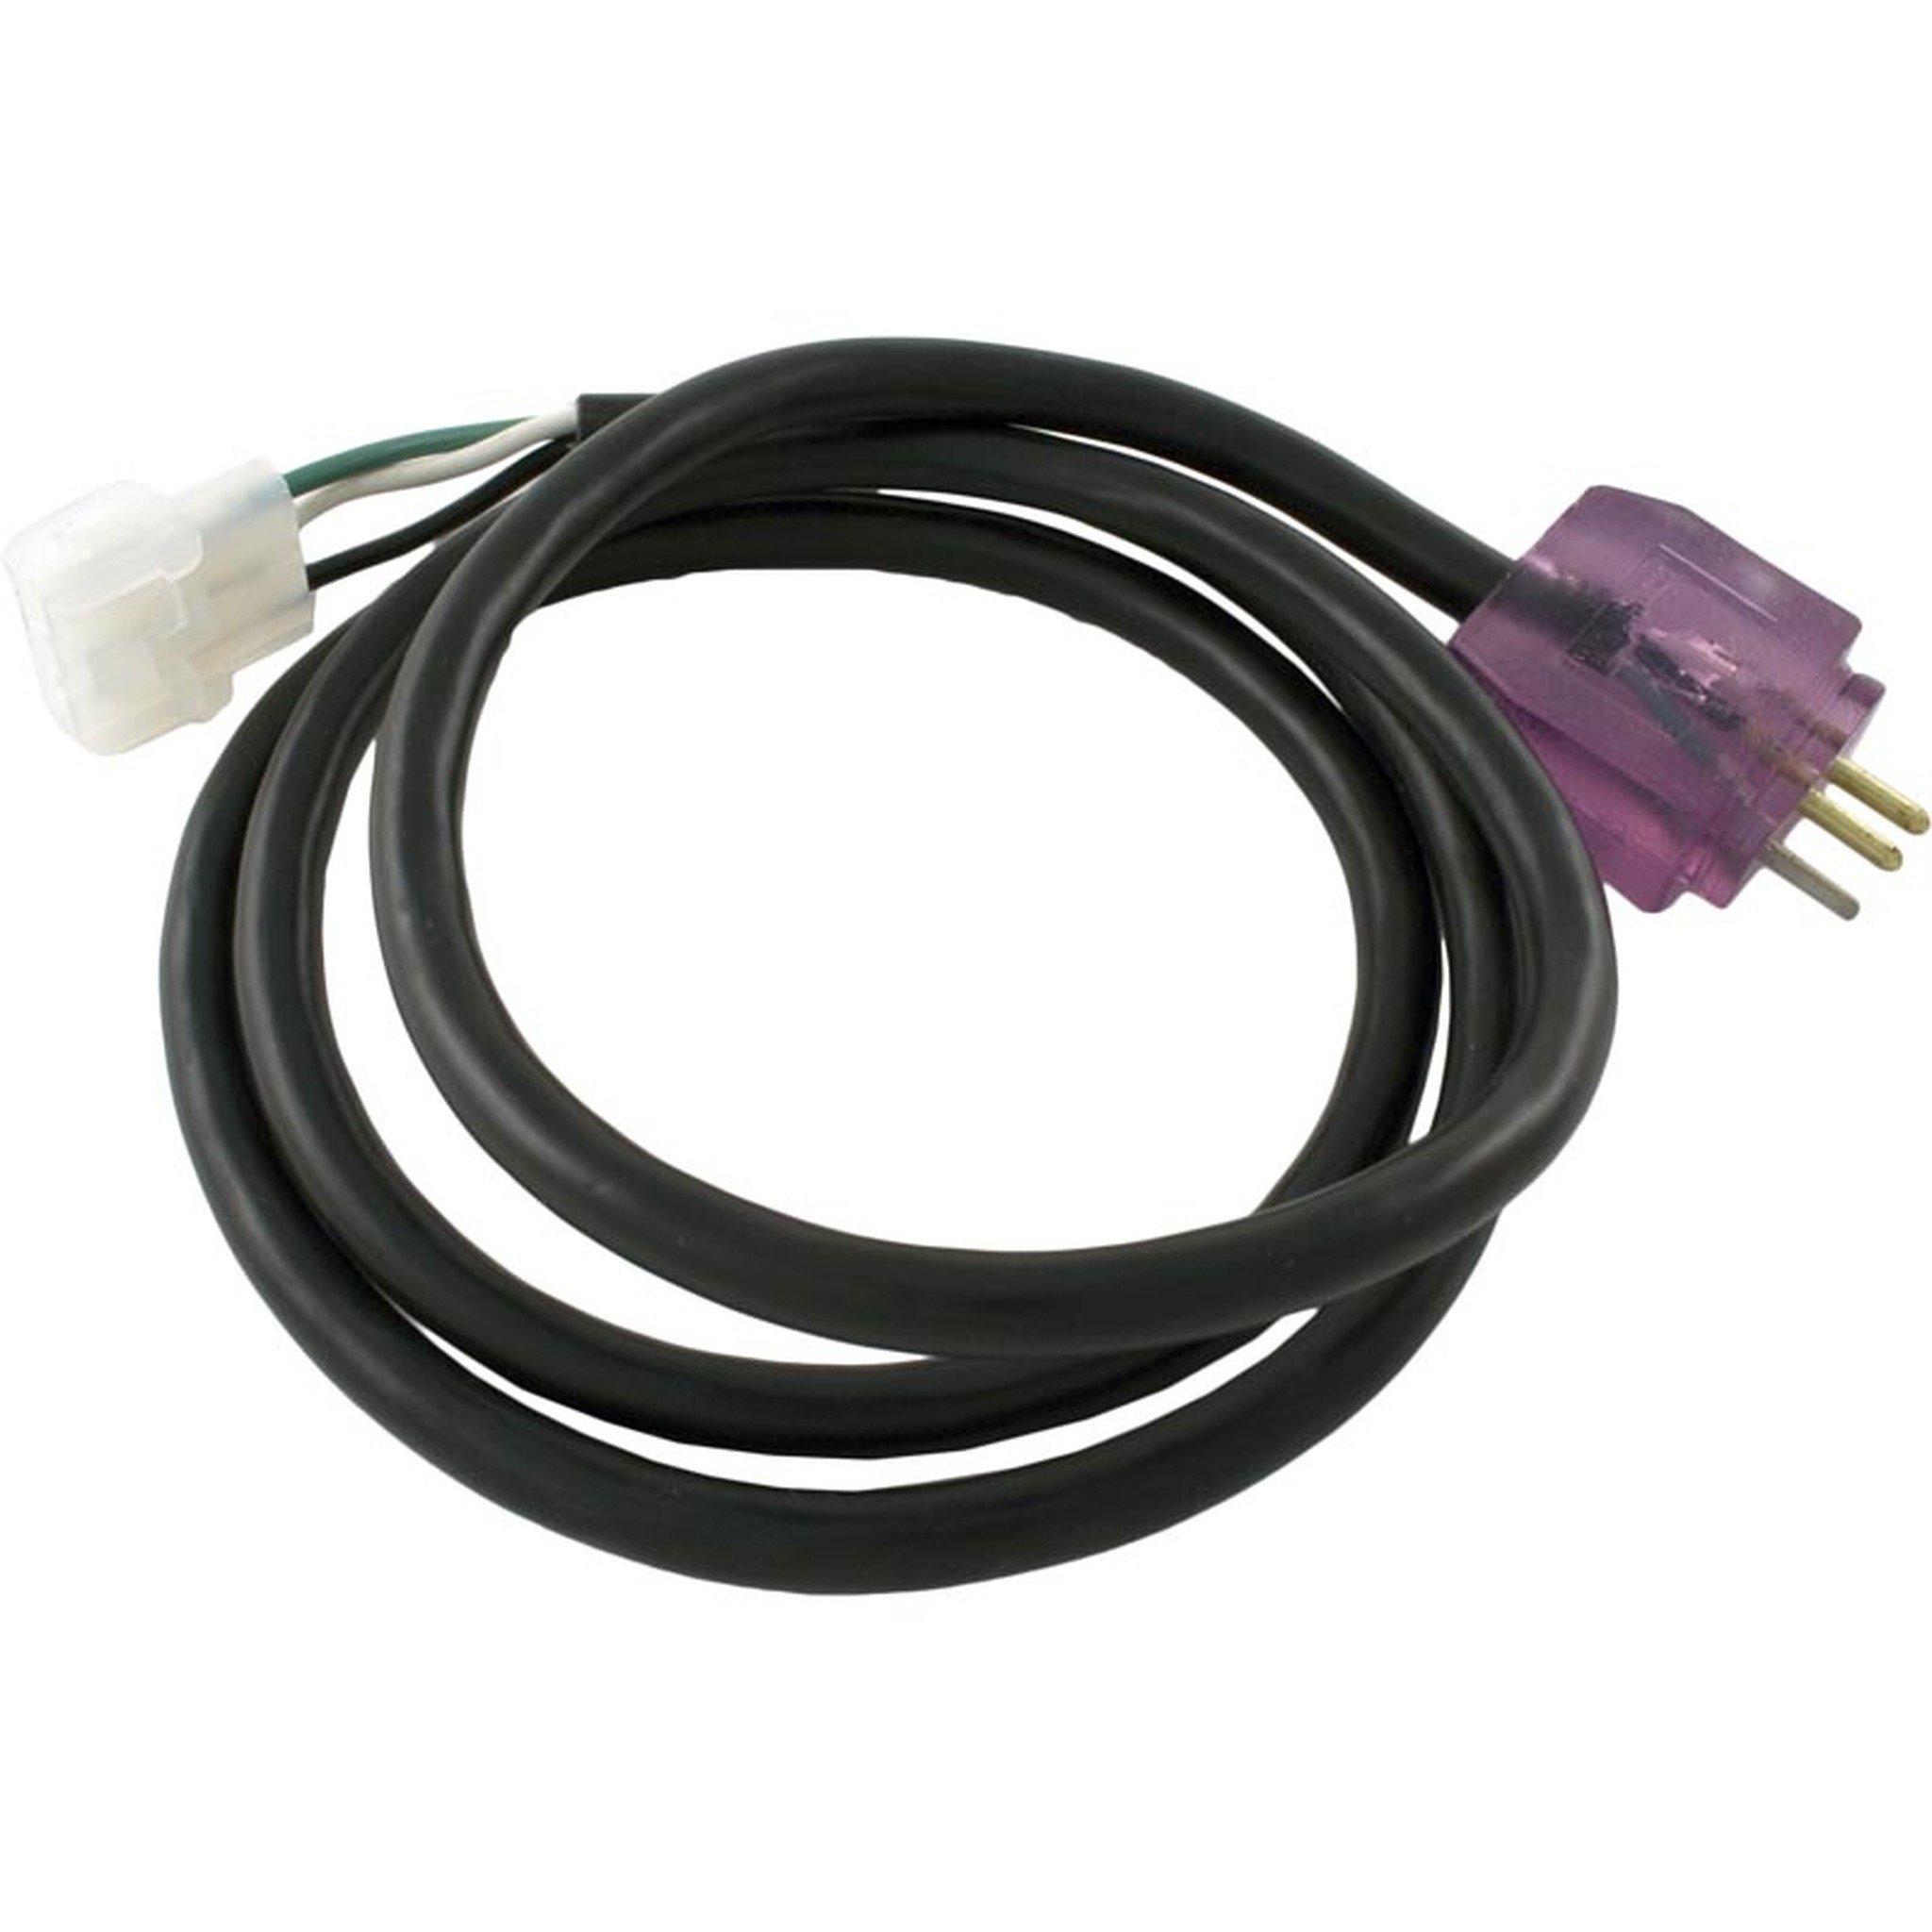 Spa Blower Power Cord, 3-wire, 48in With J&j Male P-3 Plug